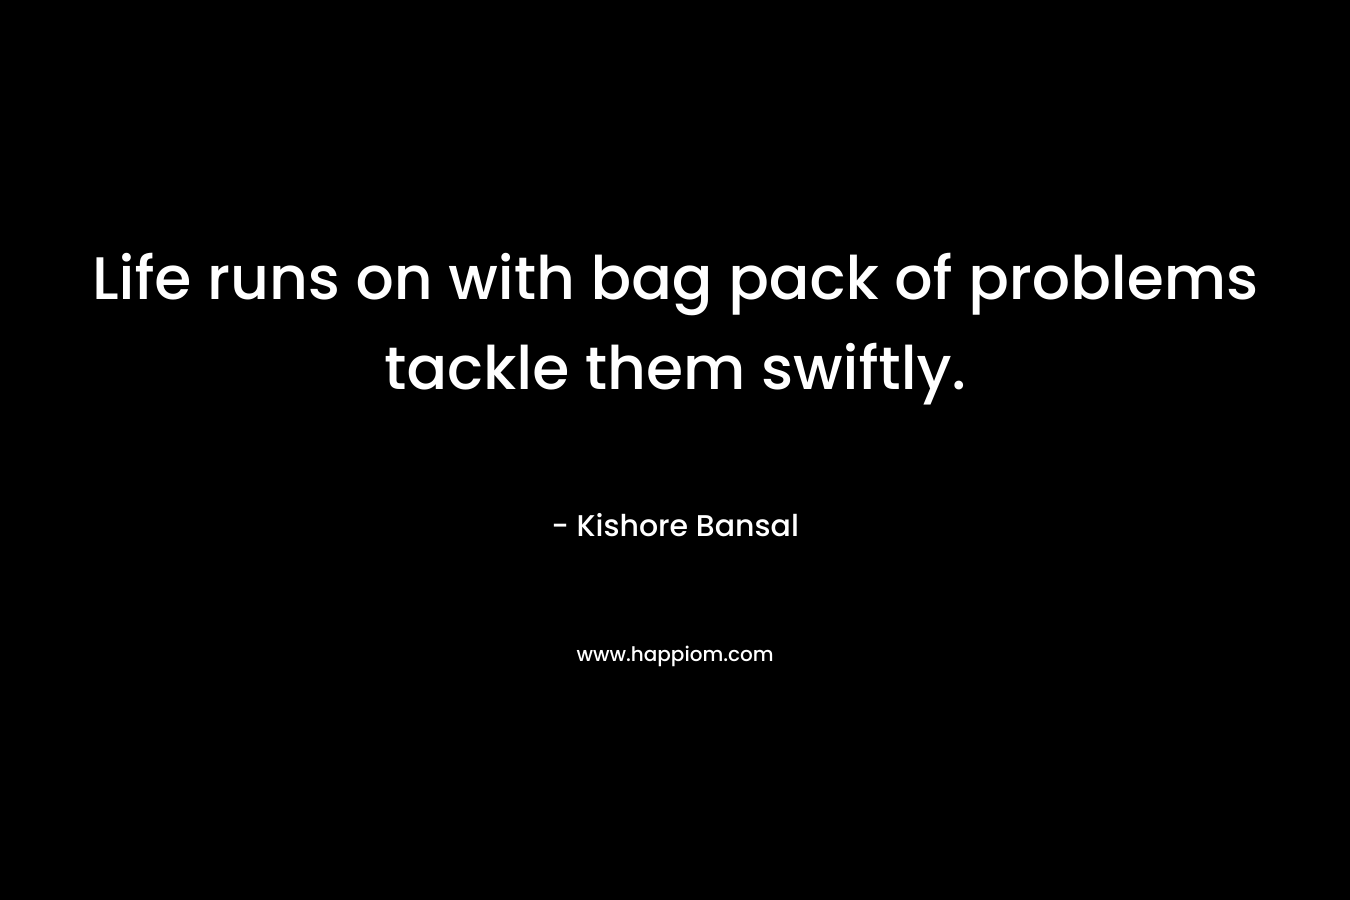 Life runs on with bag pack of problems tackle them swiftly. – Kishore Bansal